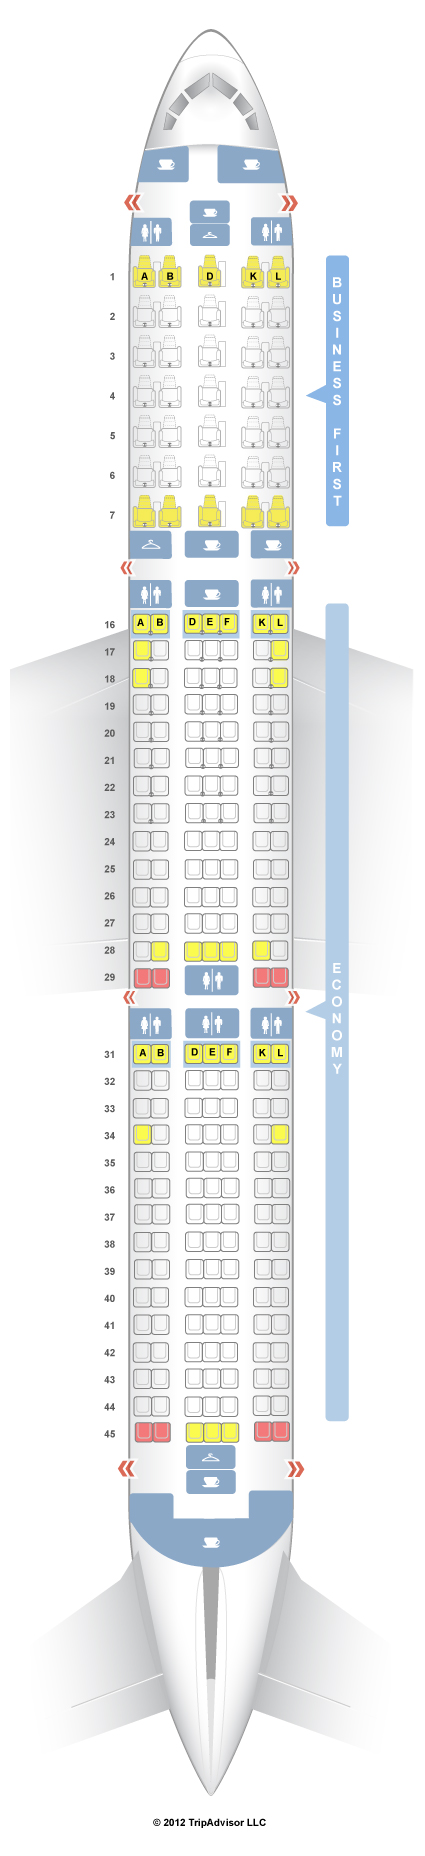 United Airlines Seating Chart